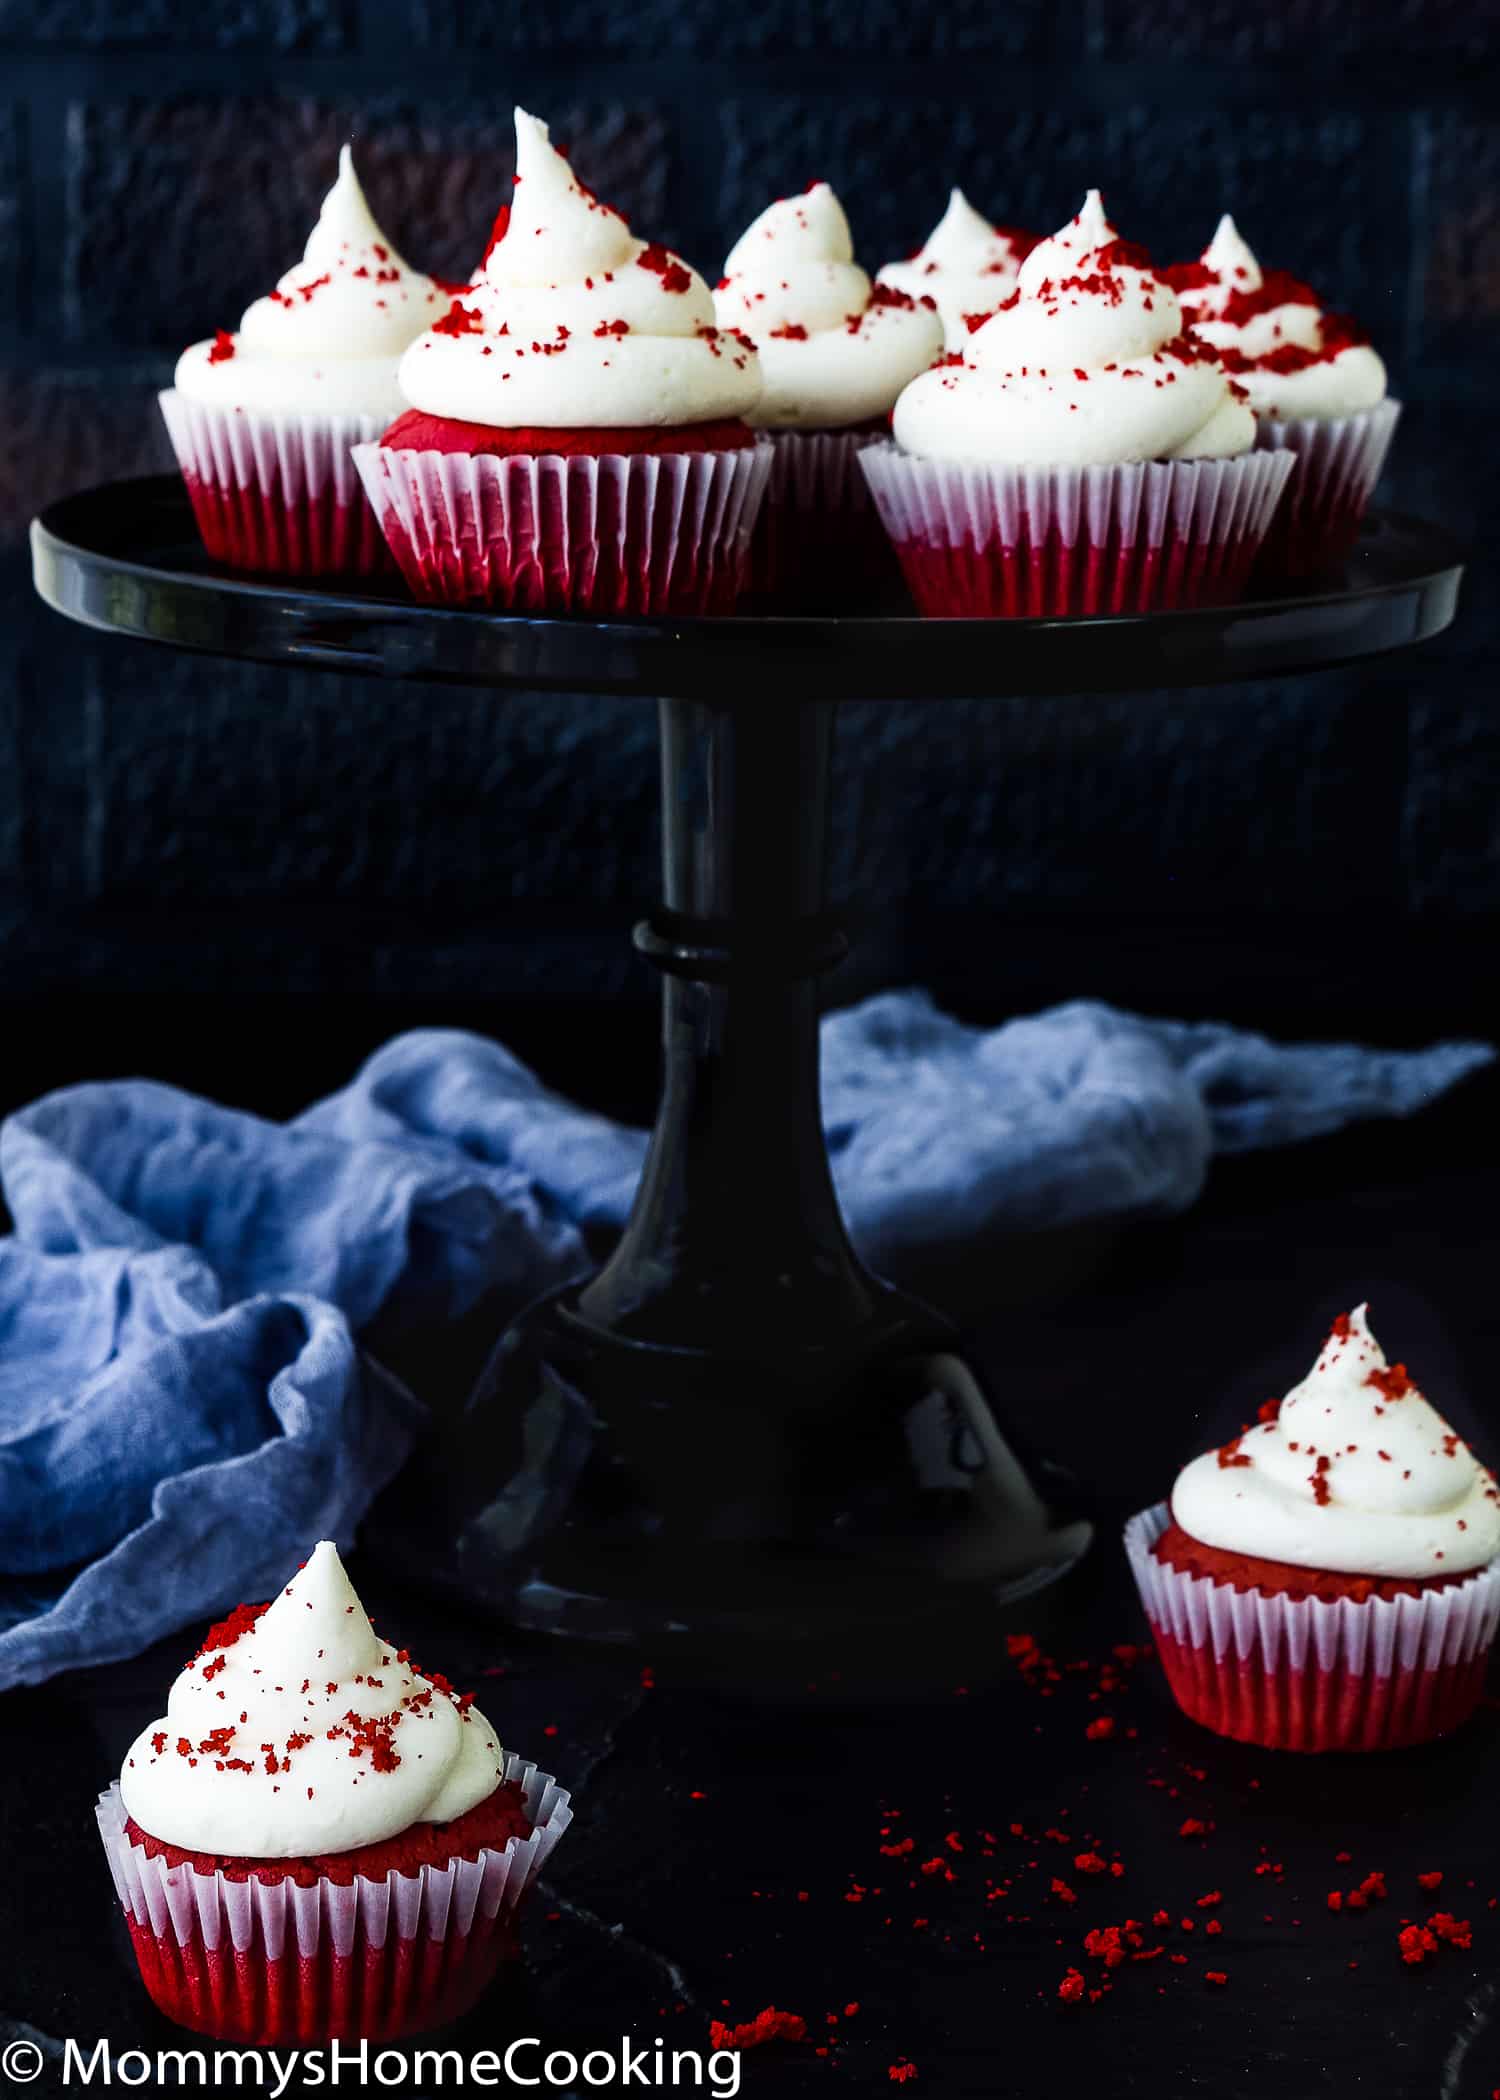 Eggless Red Velvet Cupcakes on a cake stand.